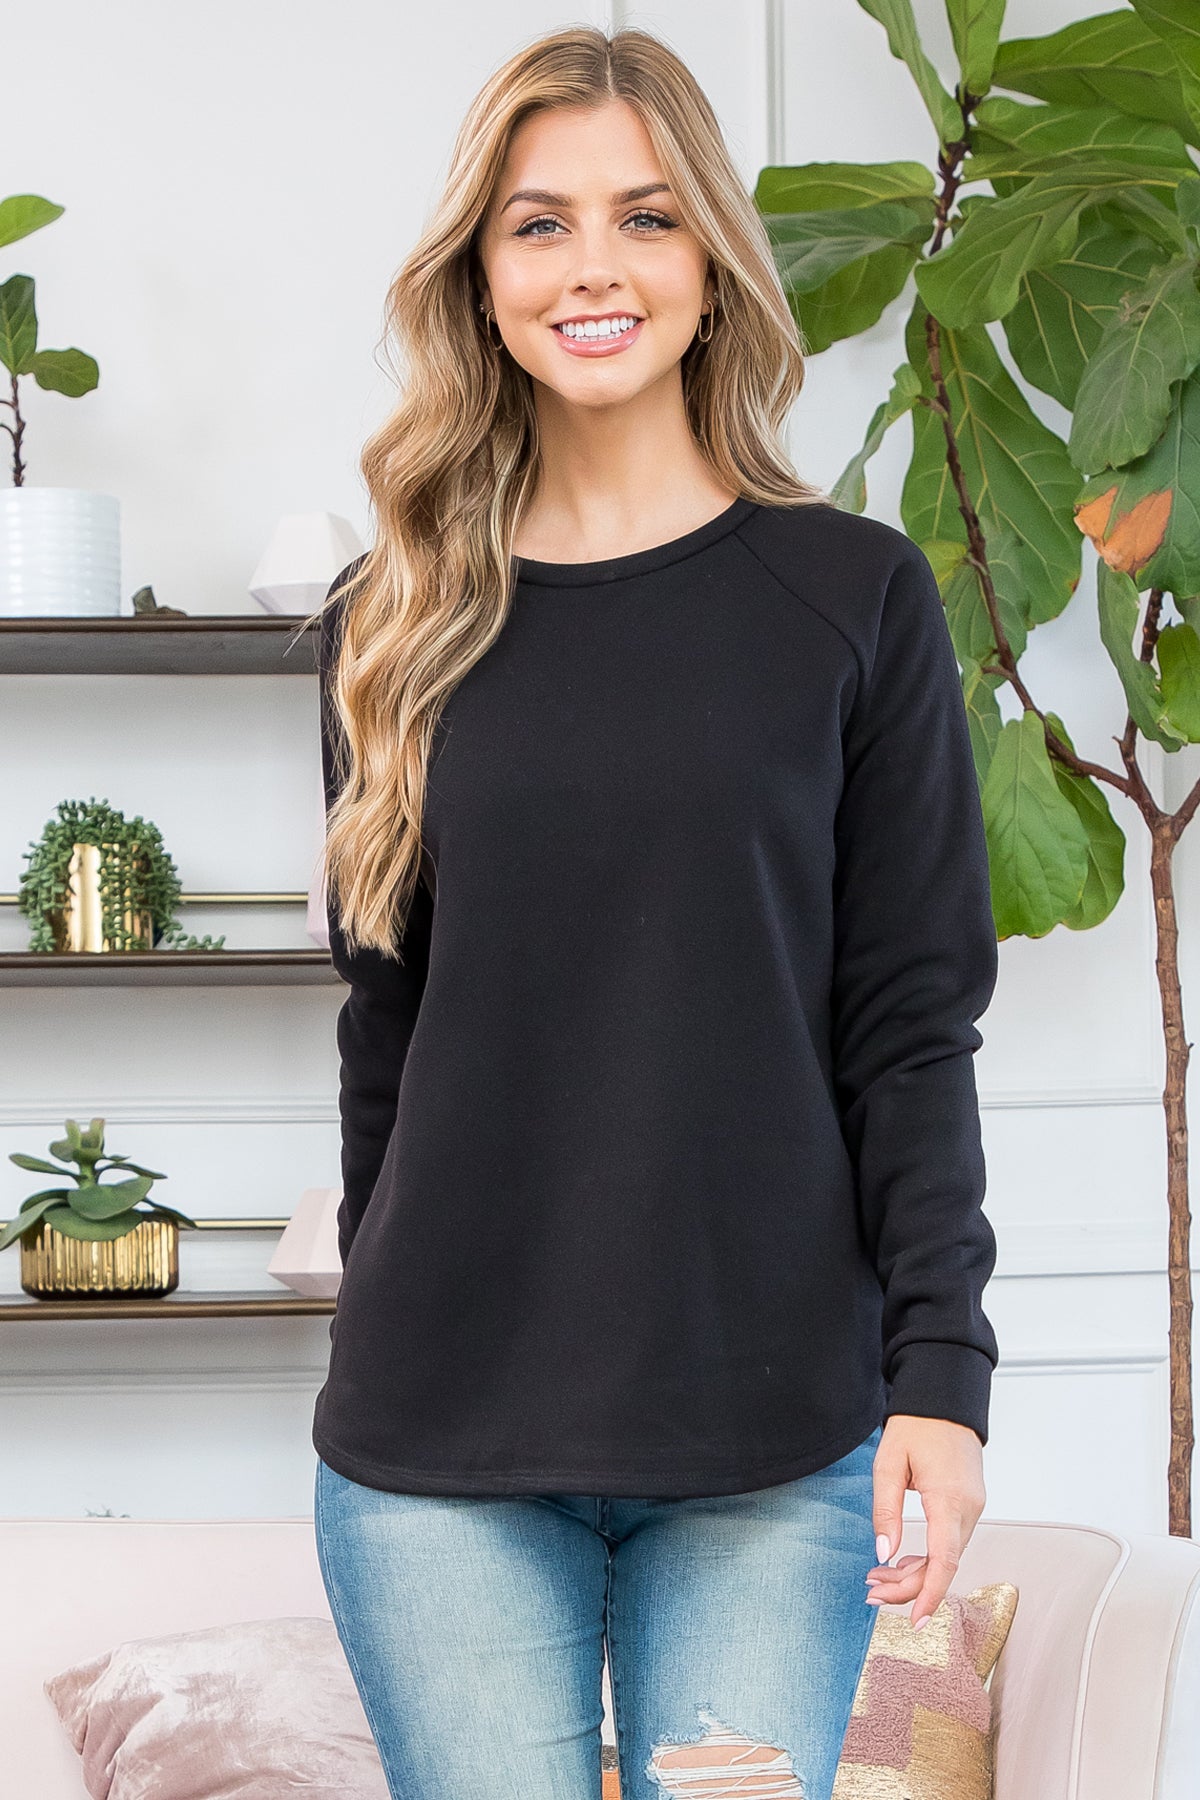 FLEECED LONG SLEEVE FRENCH TERRY PULLOVER TOP 1-2-2-2 (NOW $5.75 ONLY!)